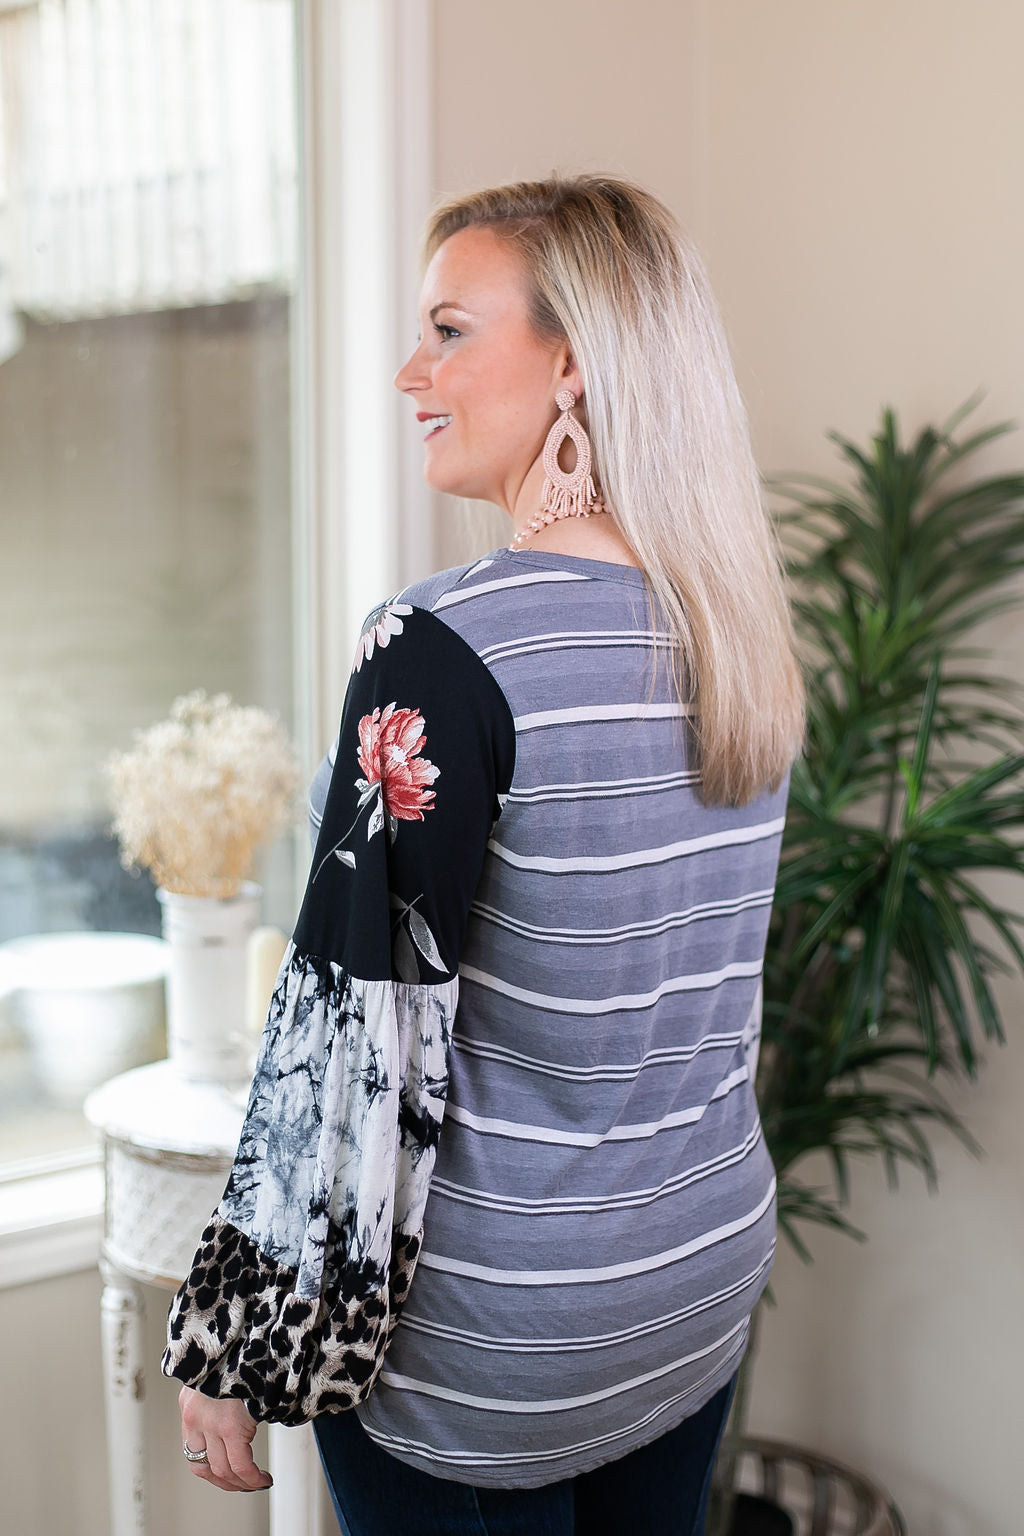 No Looking Back Striped Top with Multi Print Puff Sleeves in Black and Grey - Giddy Up Glamour Boutique